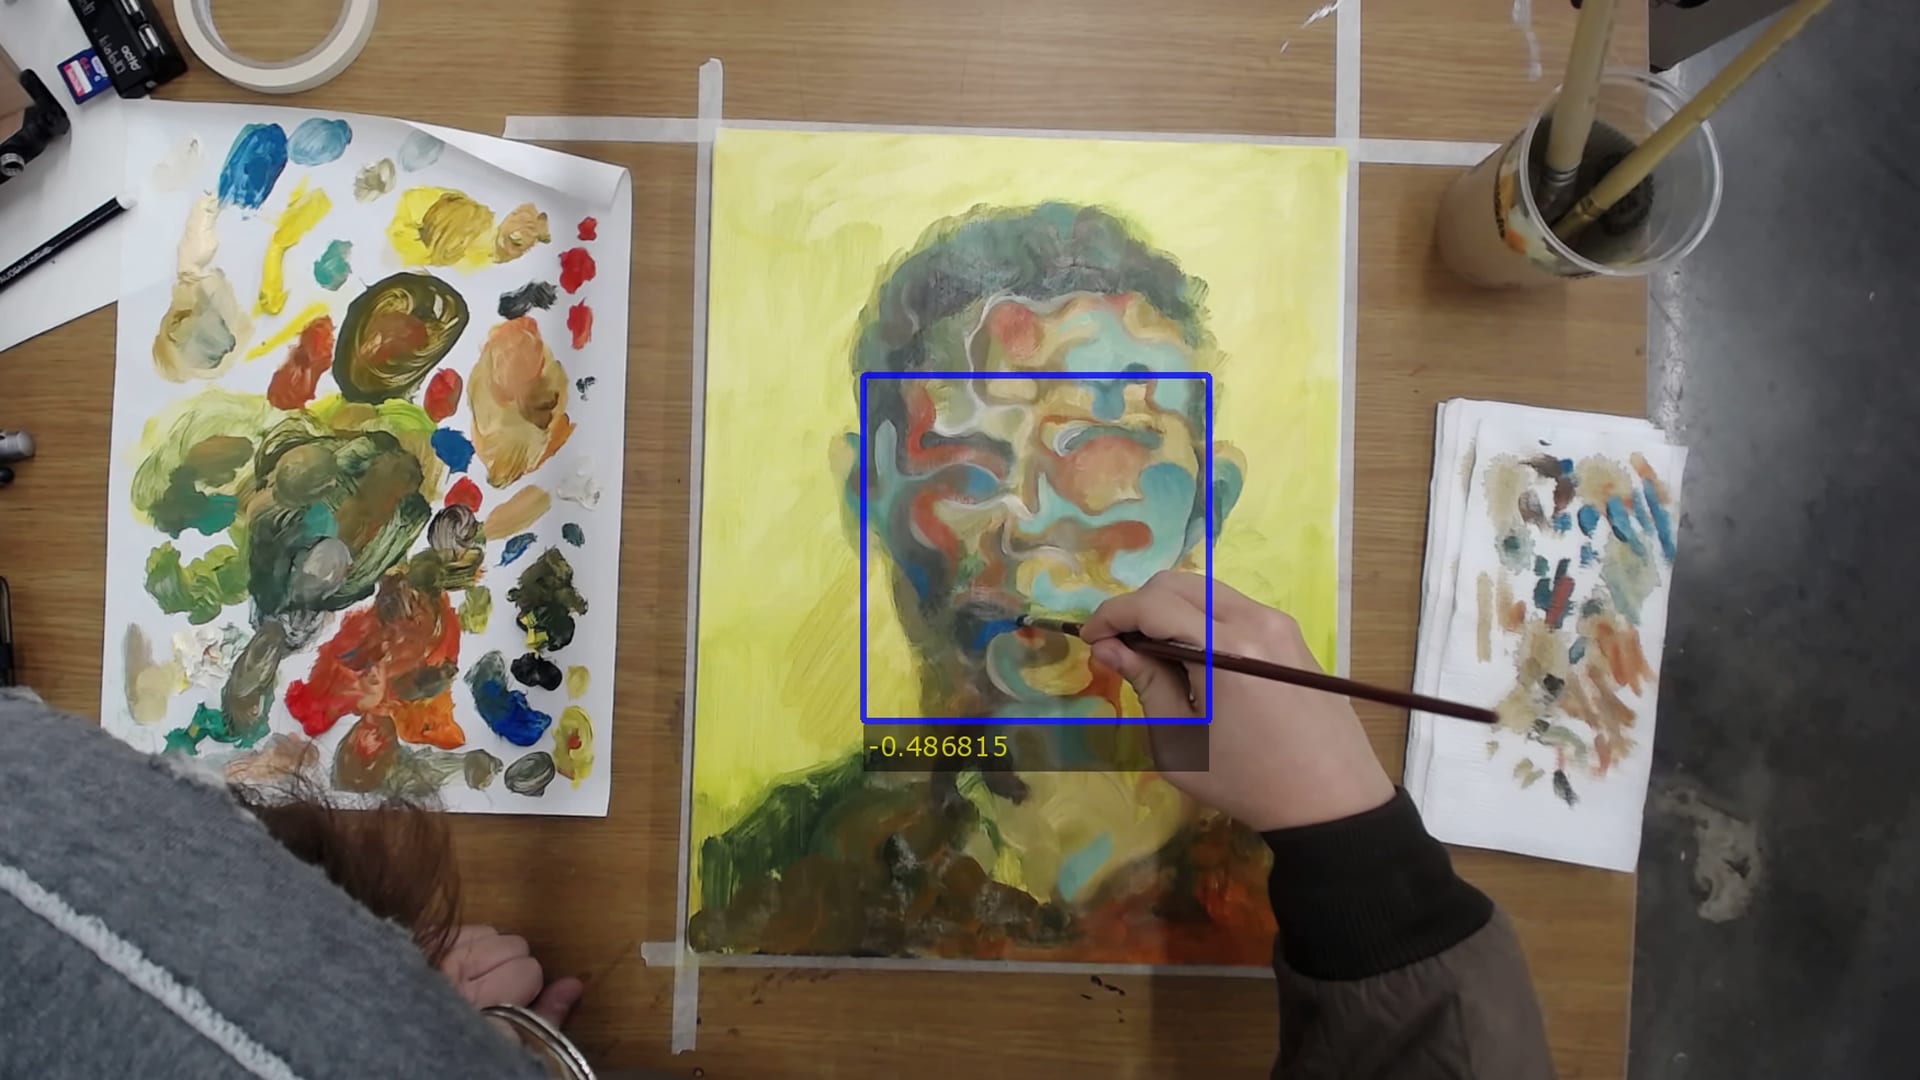 These portraits were painted to confuse facial recognition AI